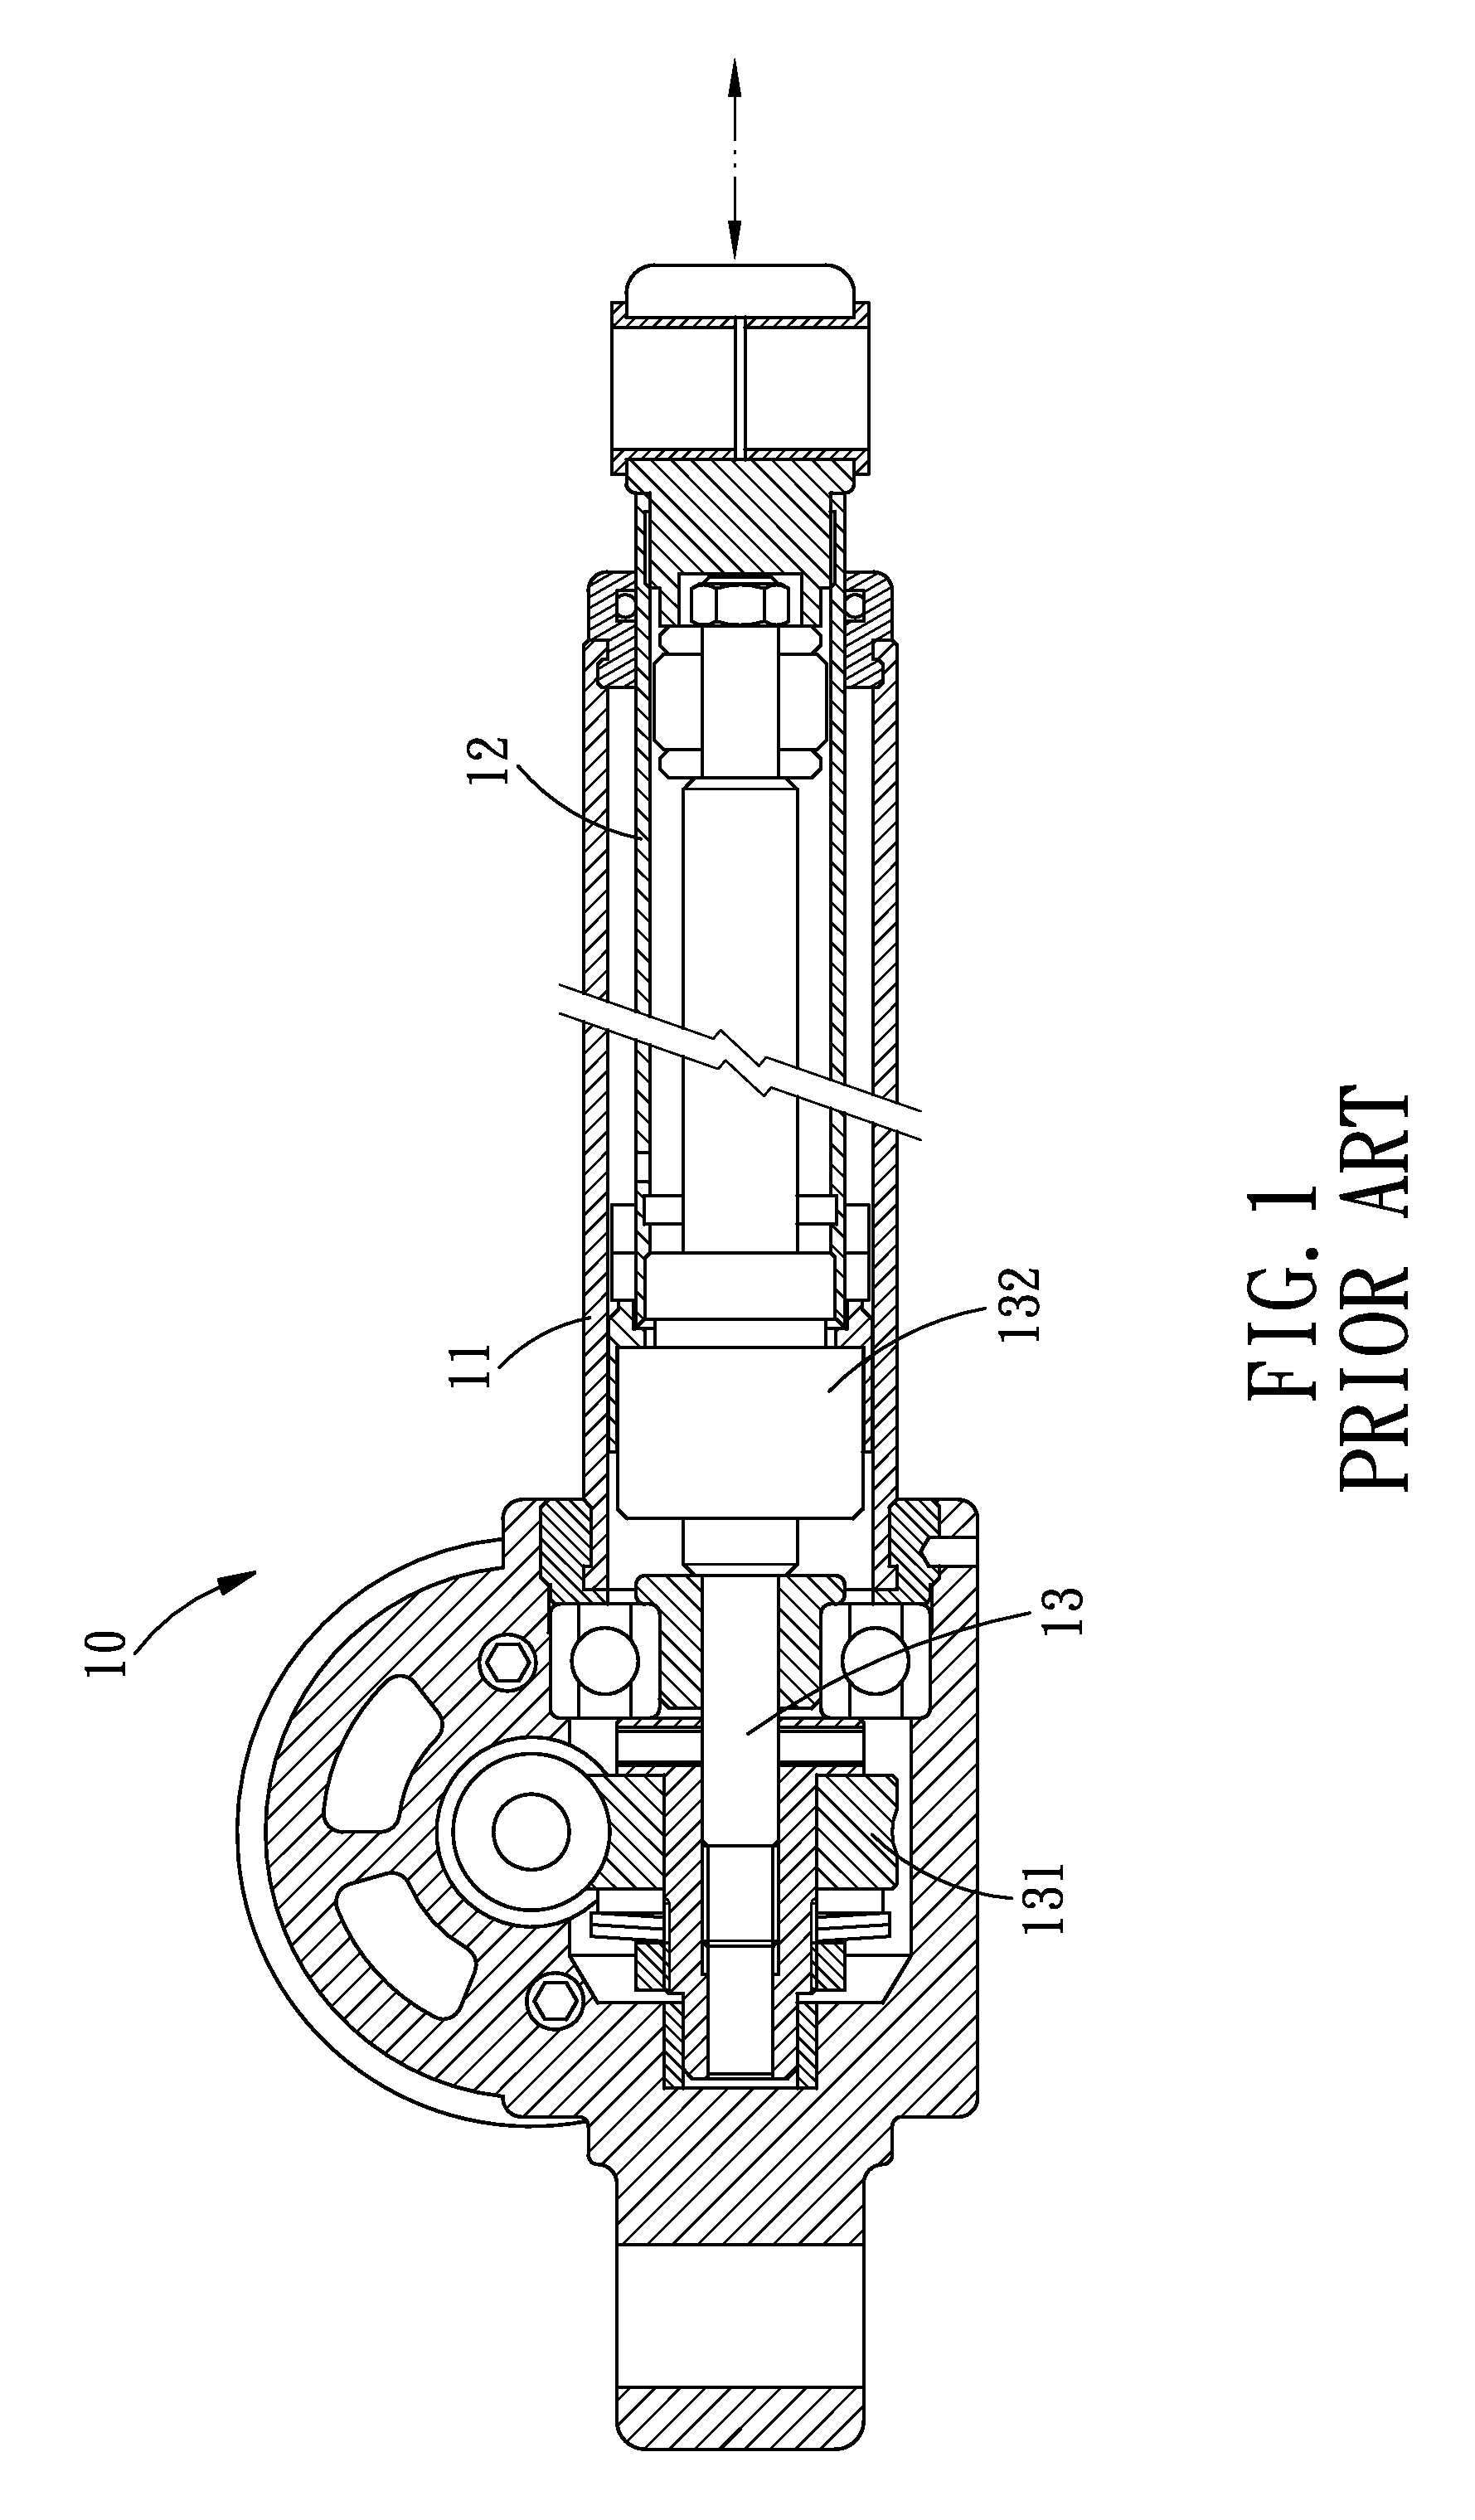 Actuator with self-locking assist device